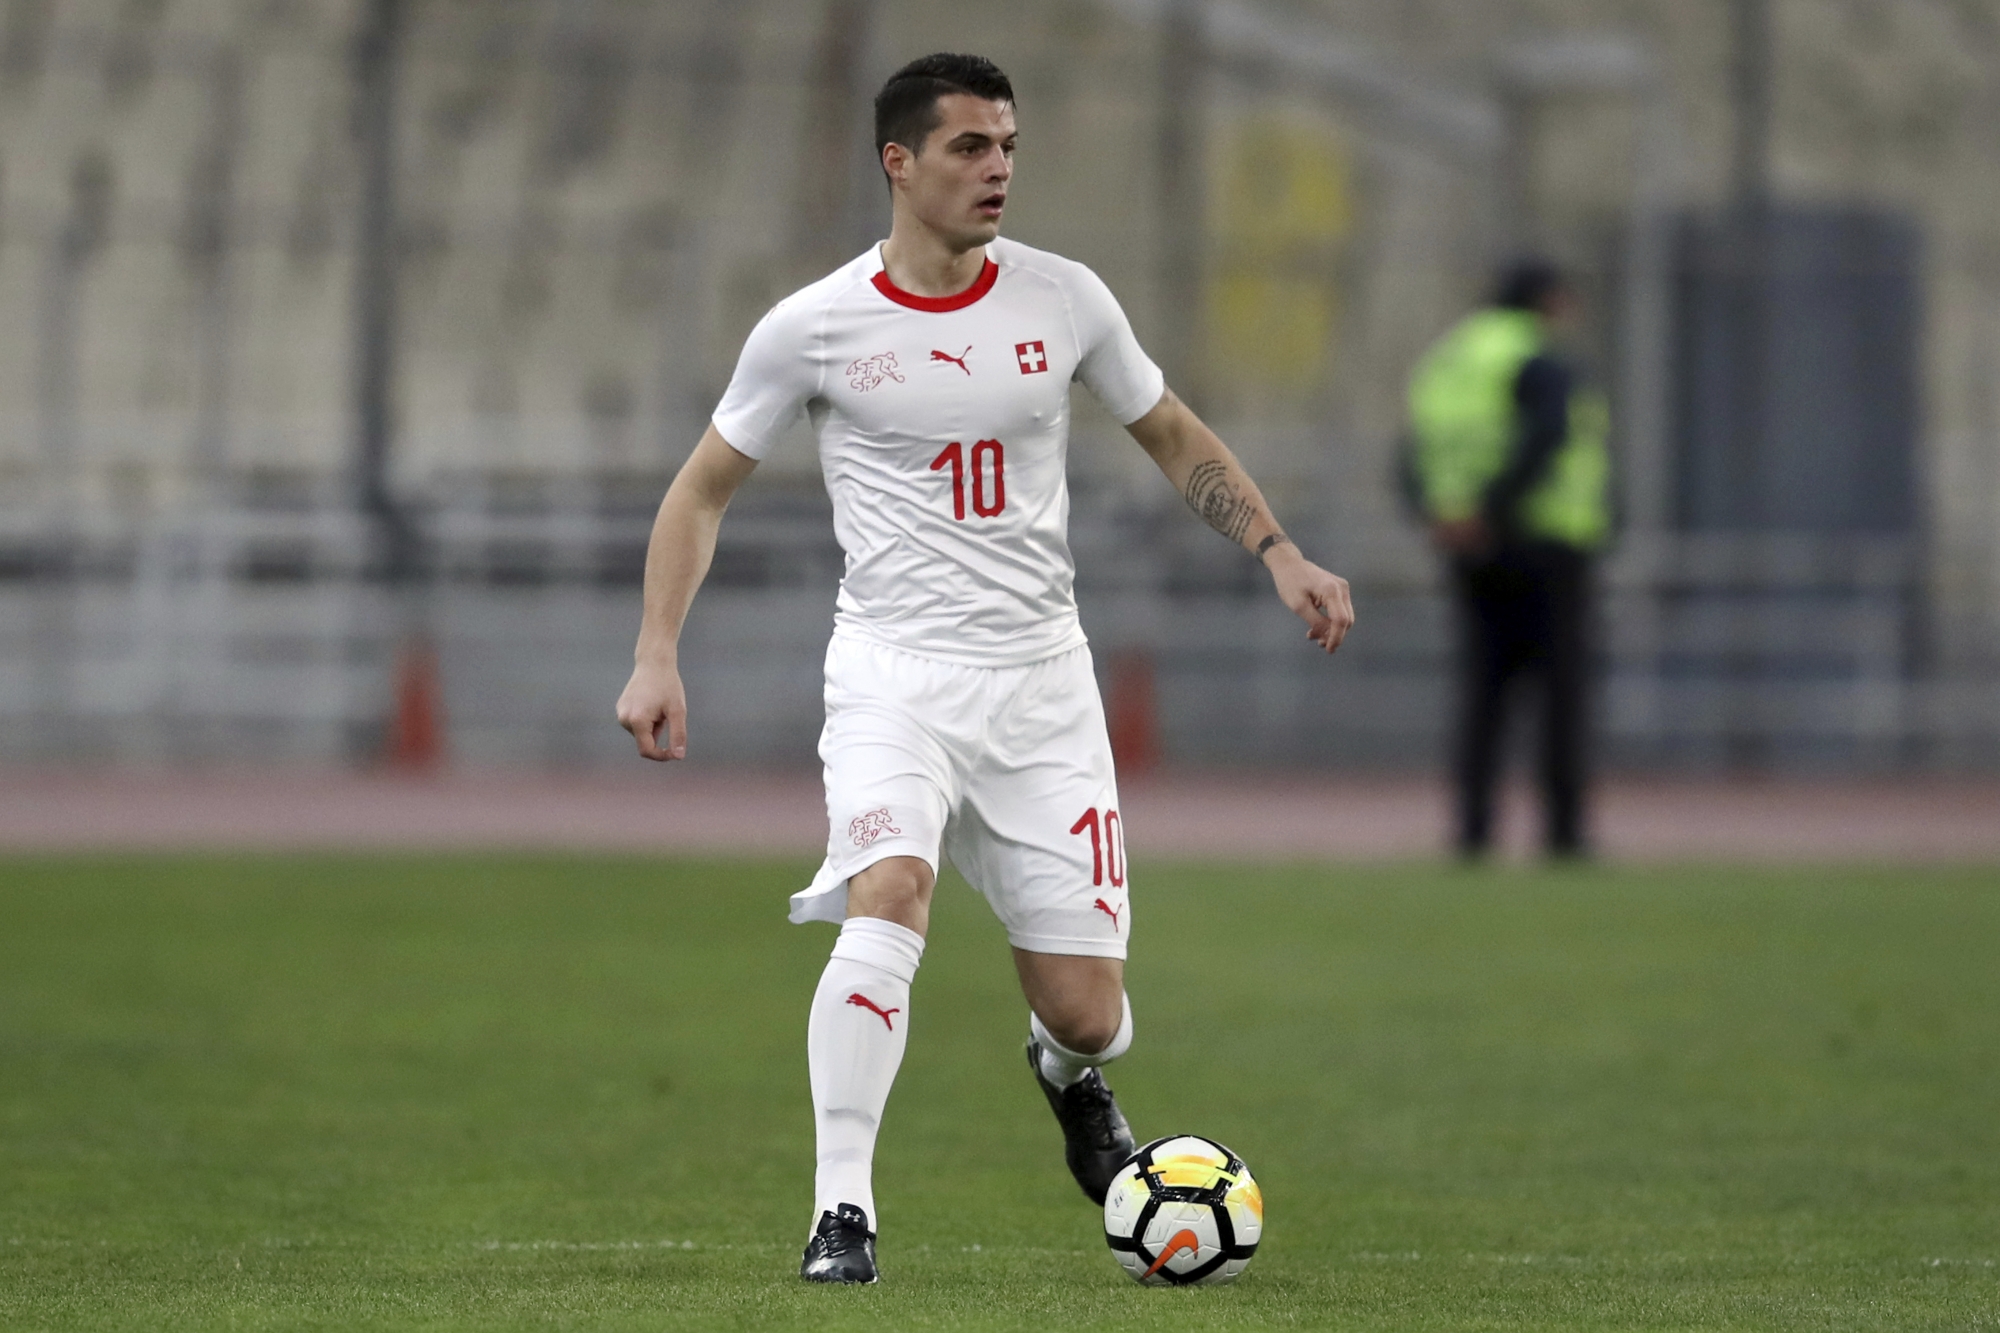 Switzerland's Granit Xhaka controls the ball during an international friendly soccer match against Greece at the Olympic stadium in Athens, Friday, March 23, 2018. (AP Photo/Thanassis Stavrakis)